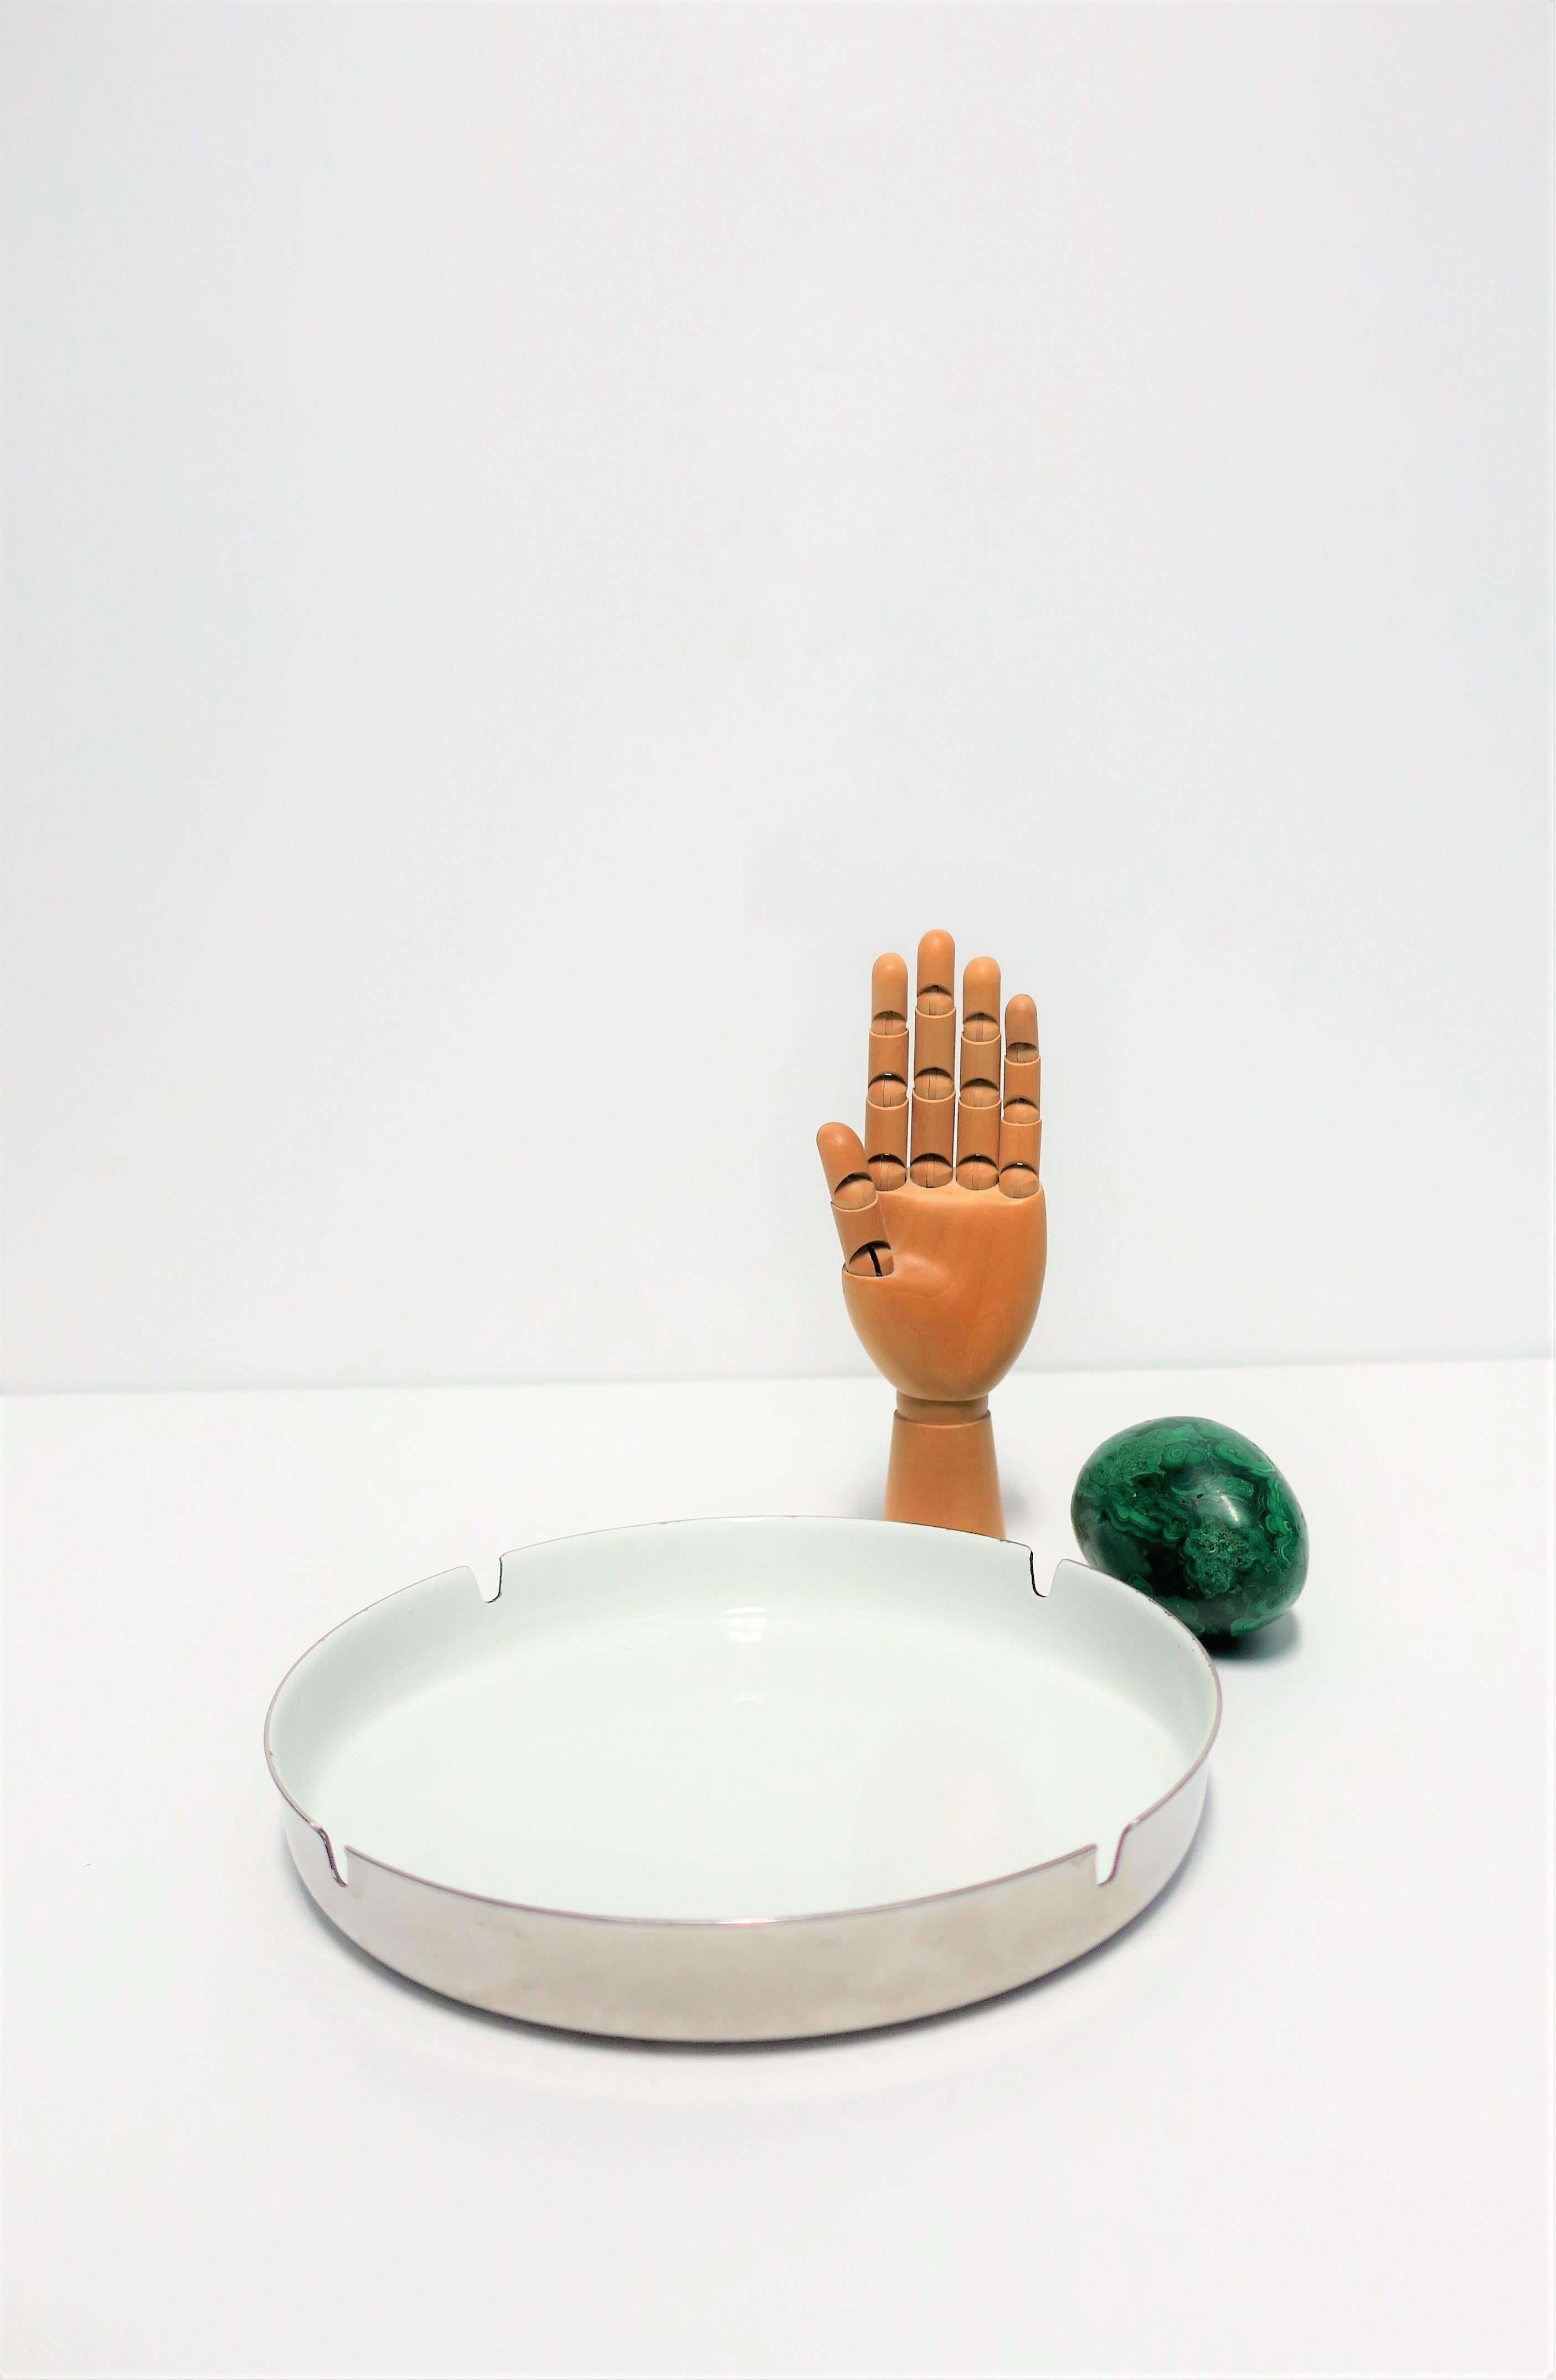 An articulating right-hand wood sculpture piece. A fun decorative object for a desk or other area. Hand measures: 7